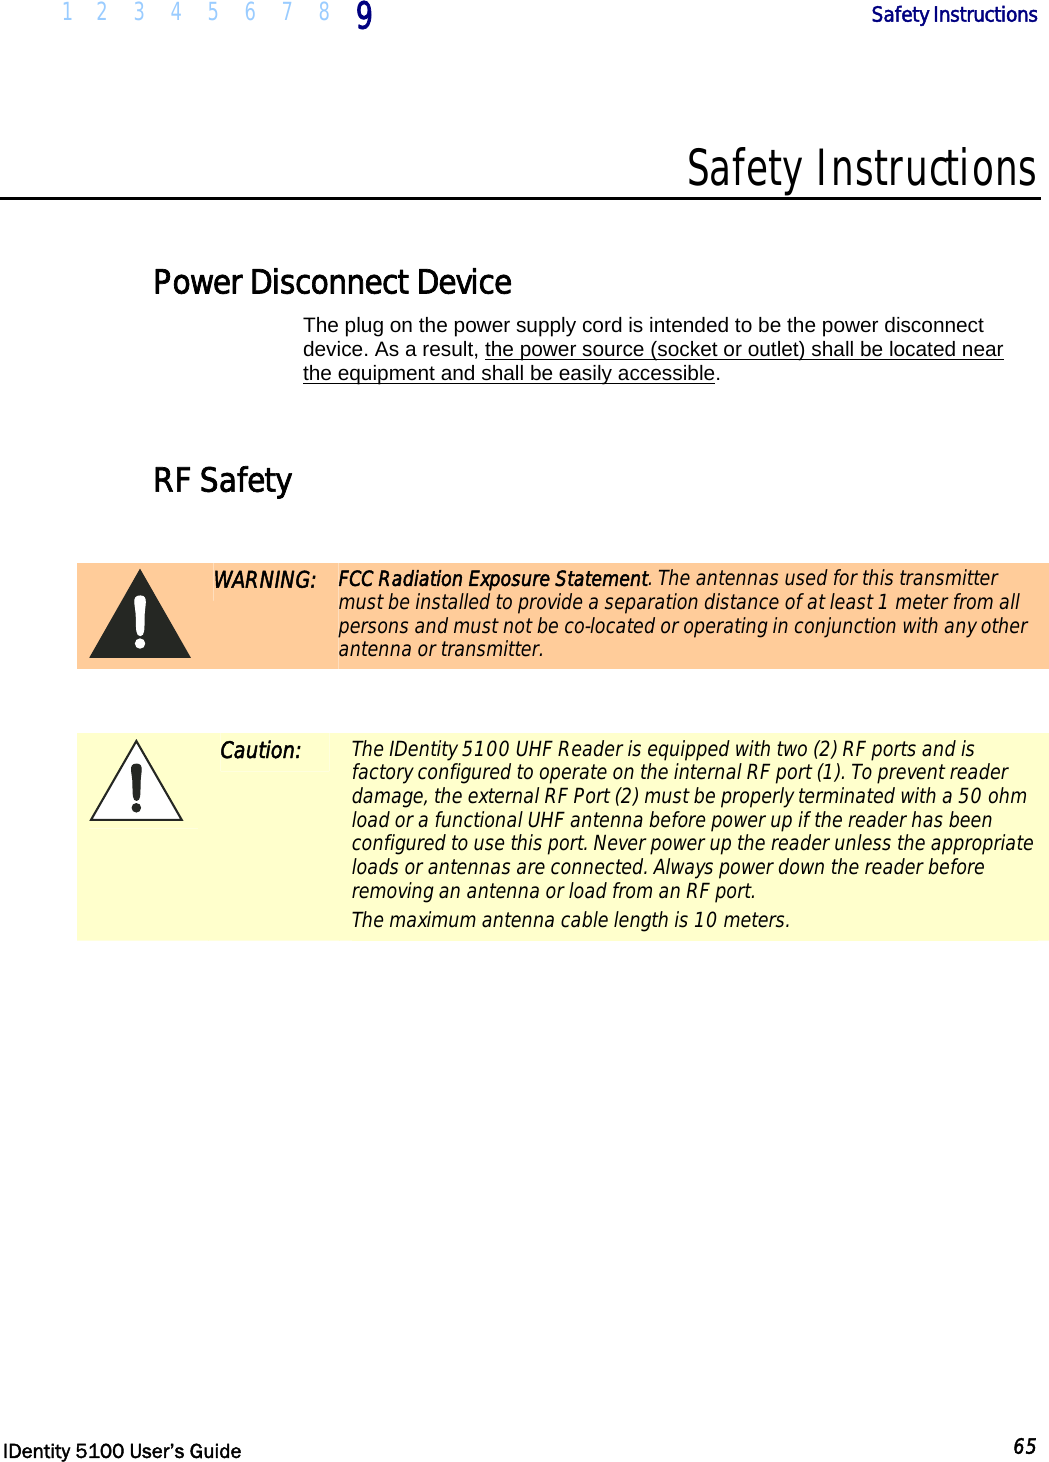  1 2 3 4 5 6 7 8 9       Safety Instructions   IDentity 5100 User’s Guide  65  Safety Instructions  Power Disconnect Device The plug on the power supply cord is intended to be the power disconnect device. As a result, the power source (socket or outlet) shall be located near the equipment and shall be easily accessible.   RF Safety   WARNING: FCC Radiation Exposure Statement. The antennas used for this transmitter must be installed to provide a separation distance of at least 1 meter from all persons and must not be co-located or operating in conjunction with any other antenna or transmitter.   Caution: The IDentity 5100 UHF Reader is equipped with two (2) RF ports and is factory configured to operate on the internal RF port (1). To prevent reader damage, the external RF Port (2) must be properly terminated with a 50 ohm load or a functional UHF antenna before power up if the reader has been configured to use this port. Never power up the reader unless the appropriate loads or antennas are connected. Always power down the reader before removing an antenna or load from an RF port. The maximum antenna cable length is 10 meters.  